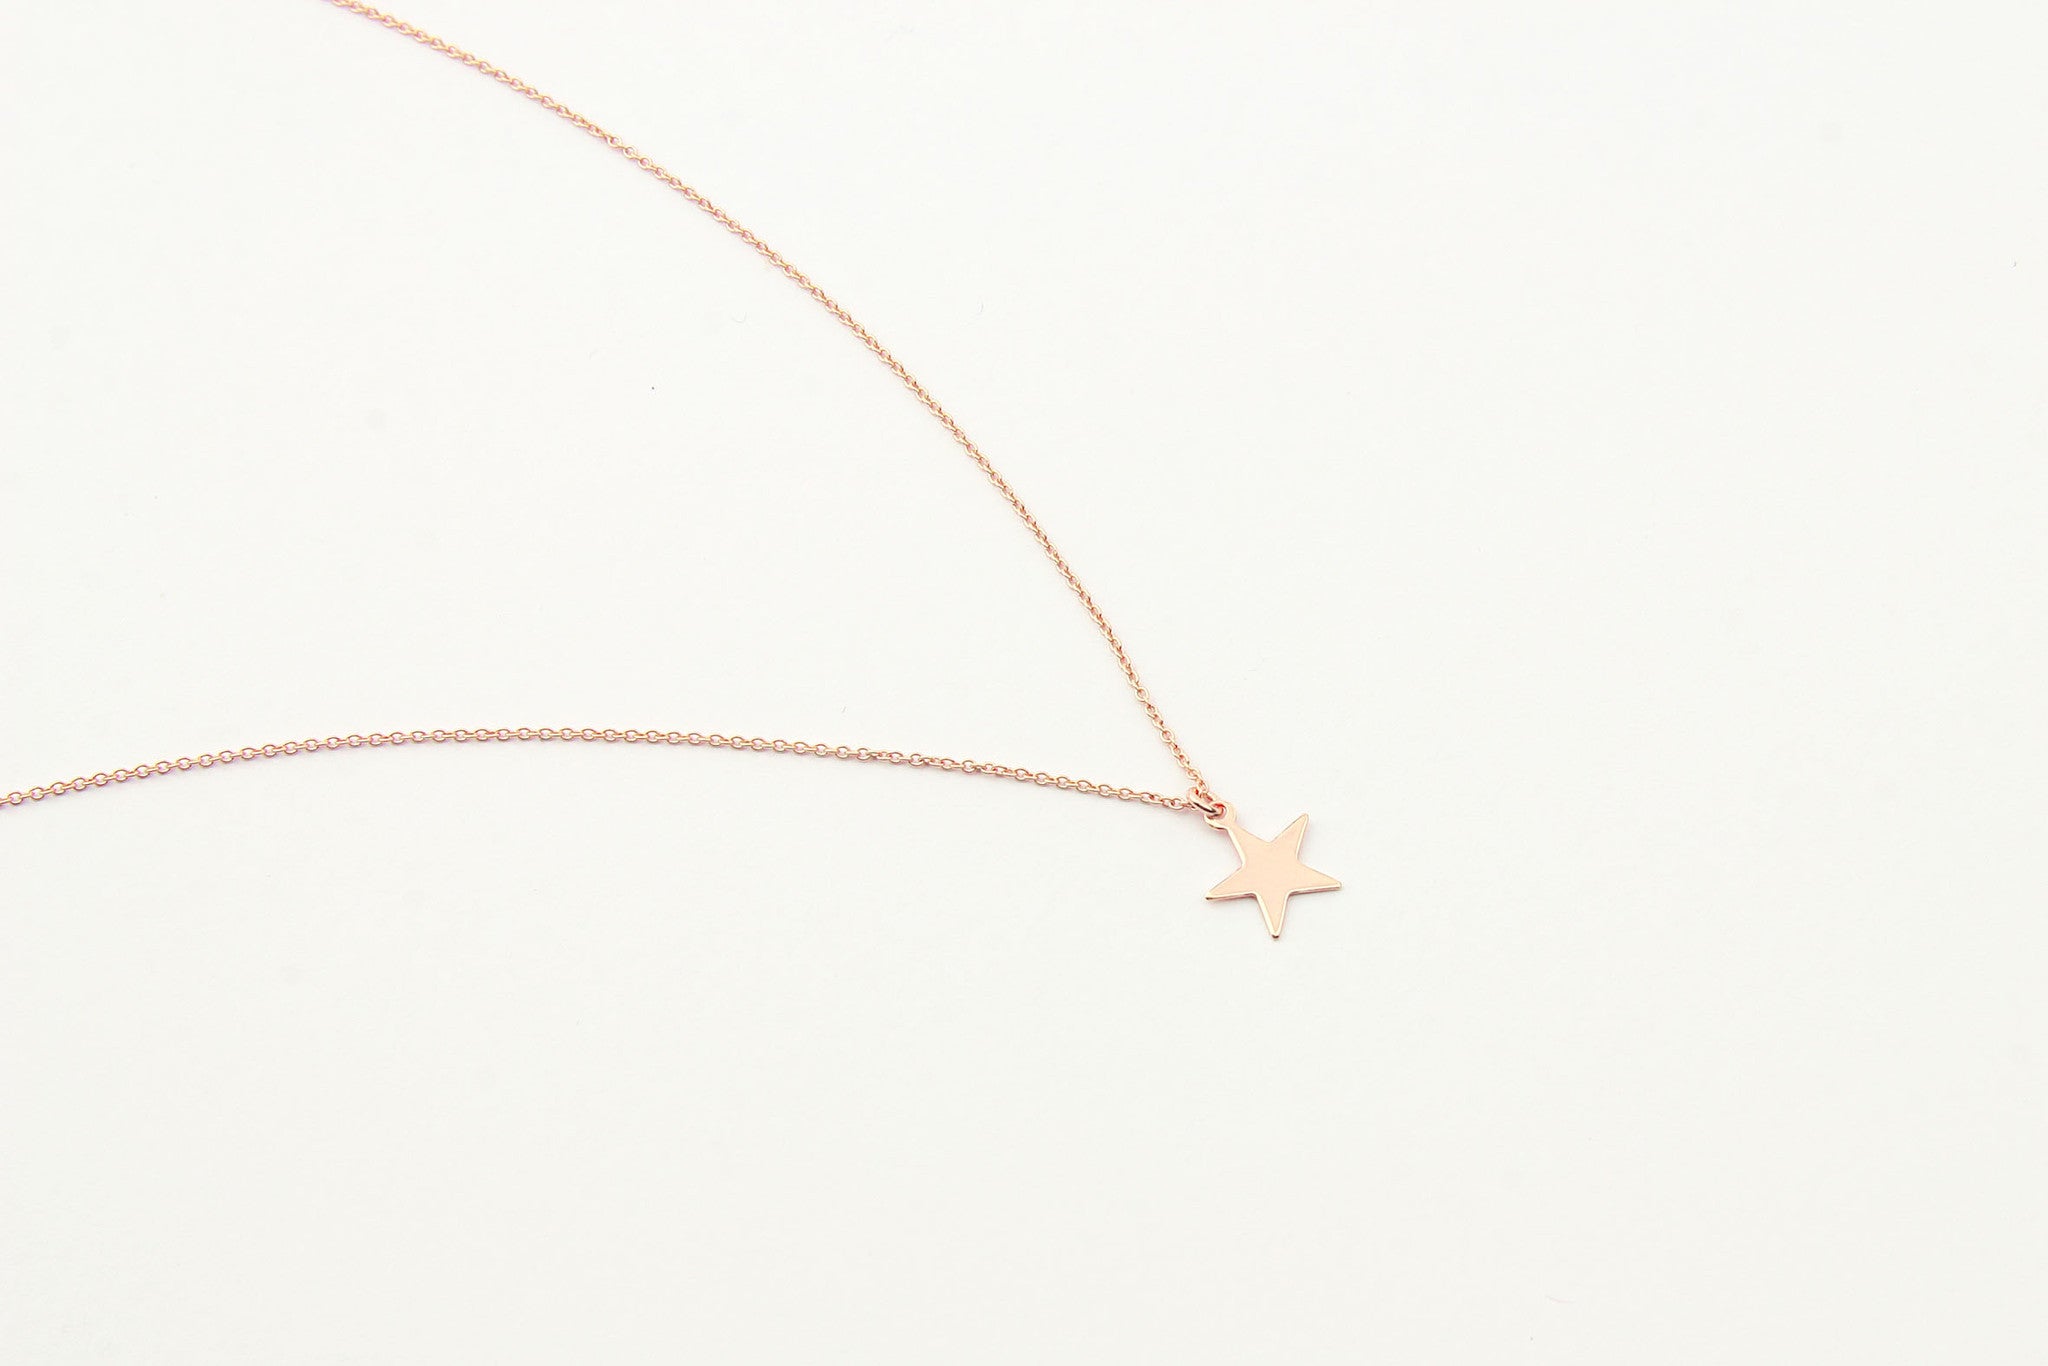 jewelberry necklace kette plain star anchor chain rose gold plated sterling silver fine jewelry handmade with love fairtrade